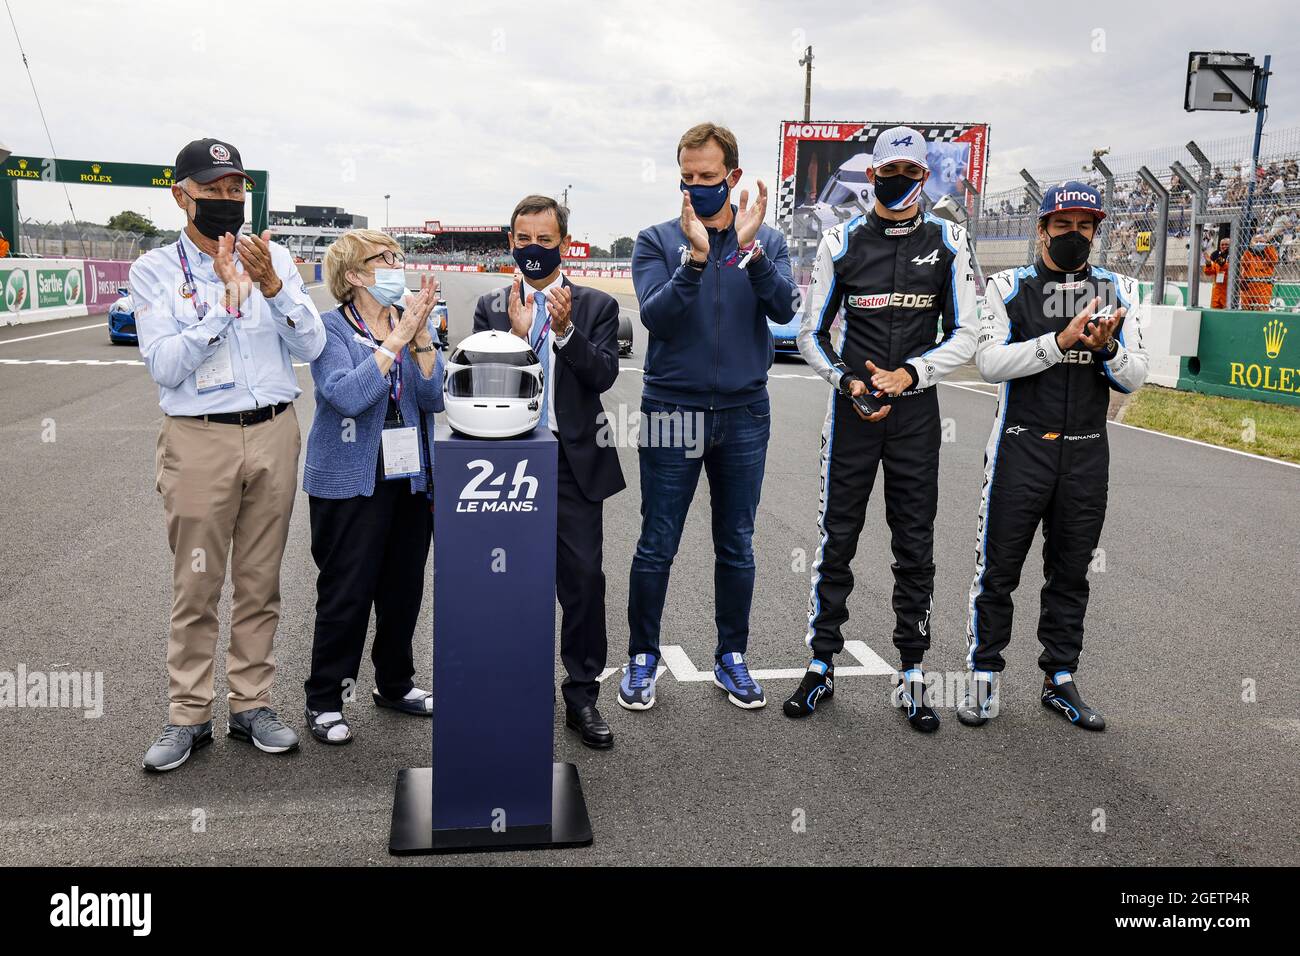 Pierre Fillon with Jean Pierre Jaussaud?s wife, Gérard Larrousse, Louis  Rossi, Esteban Ocon and Fernando Alonso, portrait during the the tribute of  her husband prior to the 24 Hours of Le Mans